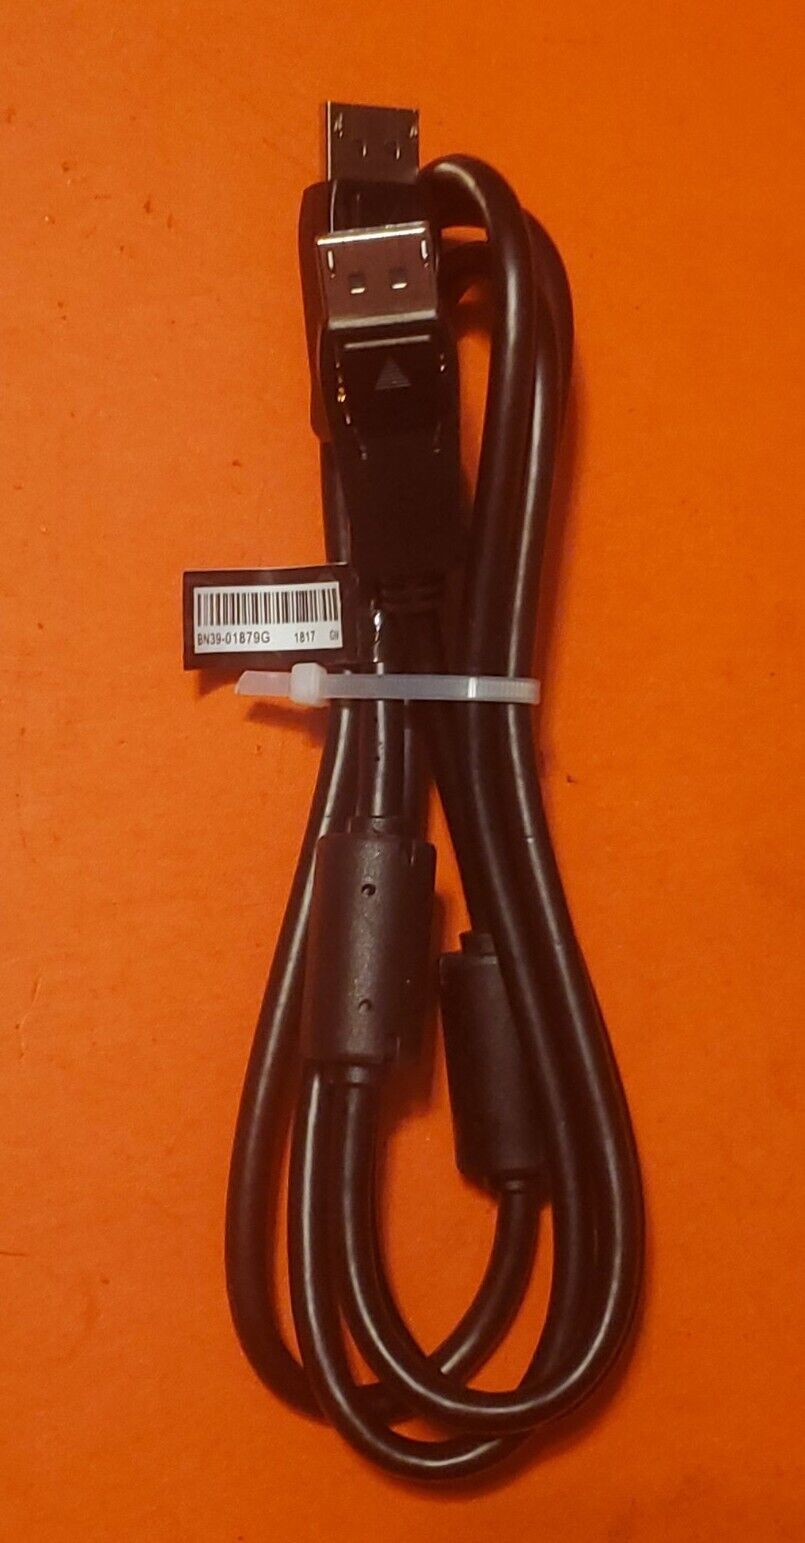 SAMSUNG CBF Display Port to DP 5ft Cable BN39-01879G